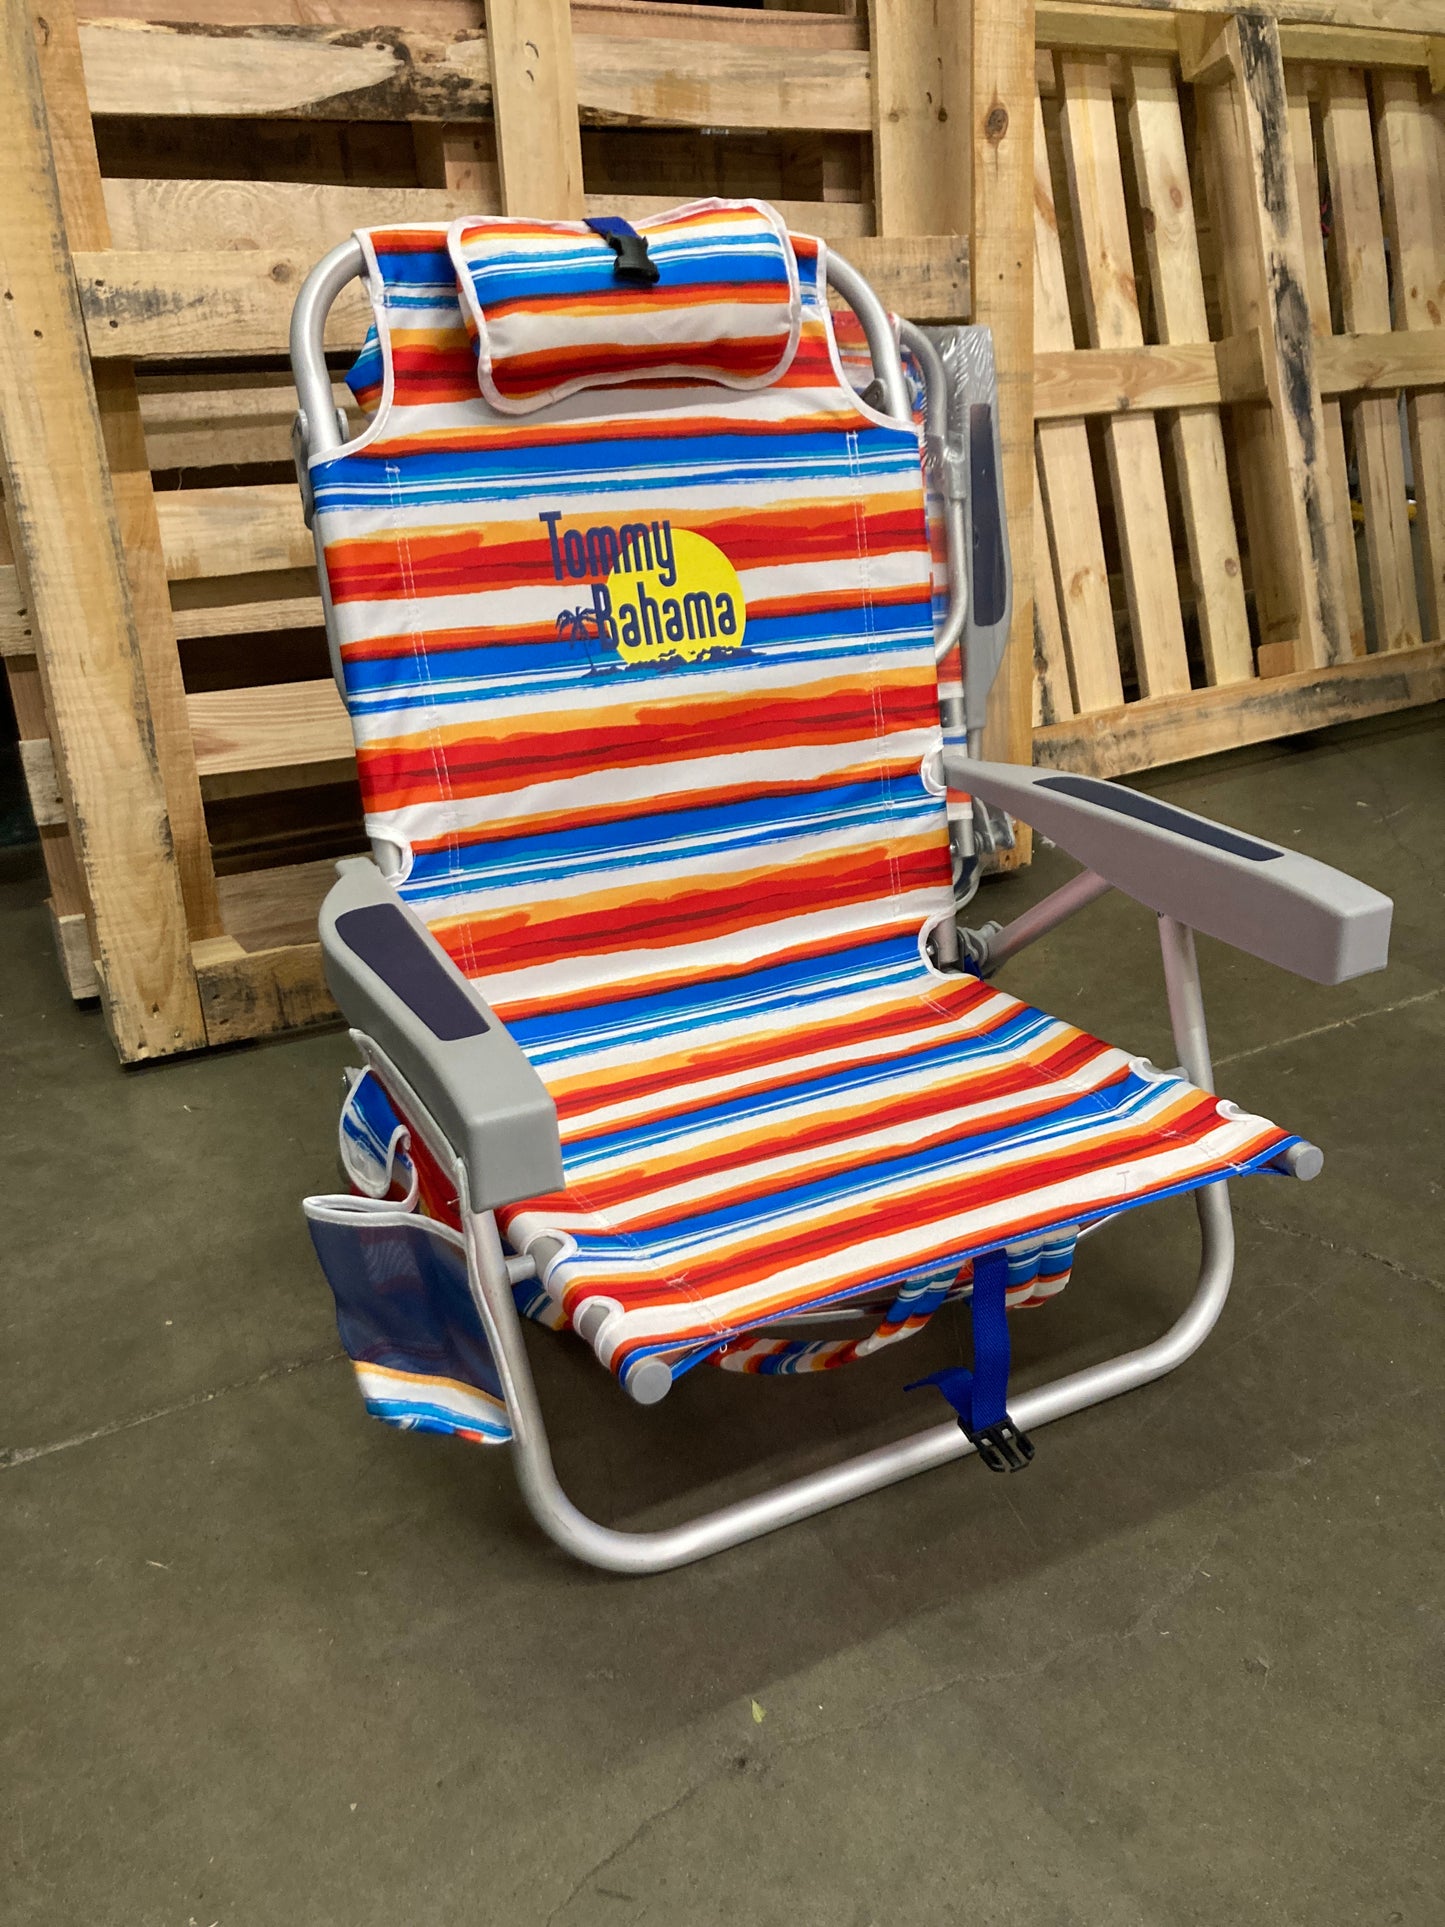 NEW - Costco - Set of 2 Tommy Bahama Beach Chairs - Retail $90 Default Title